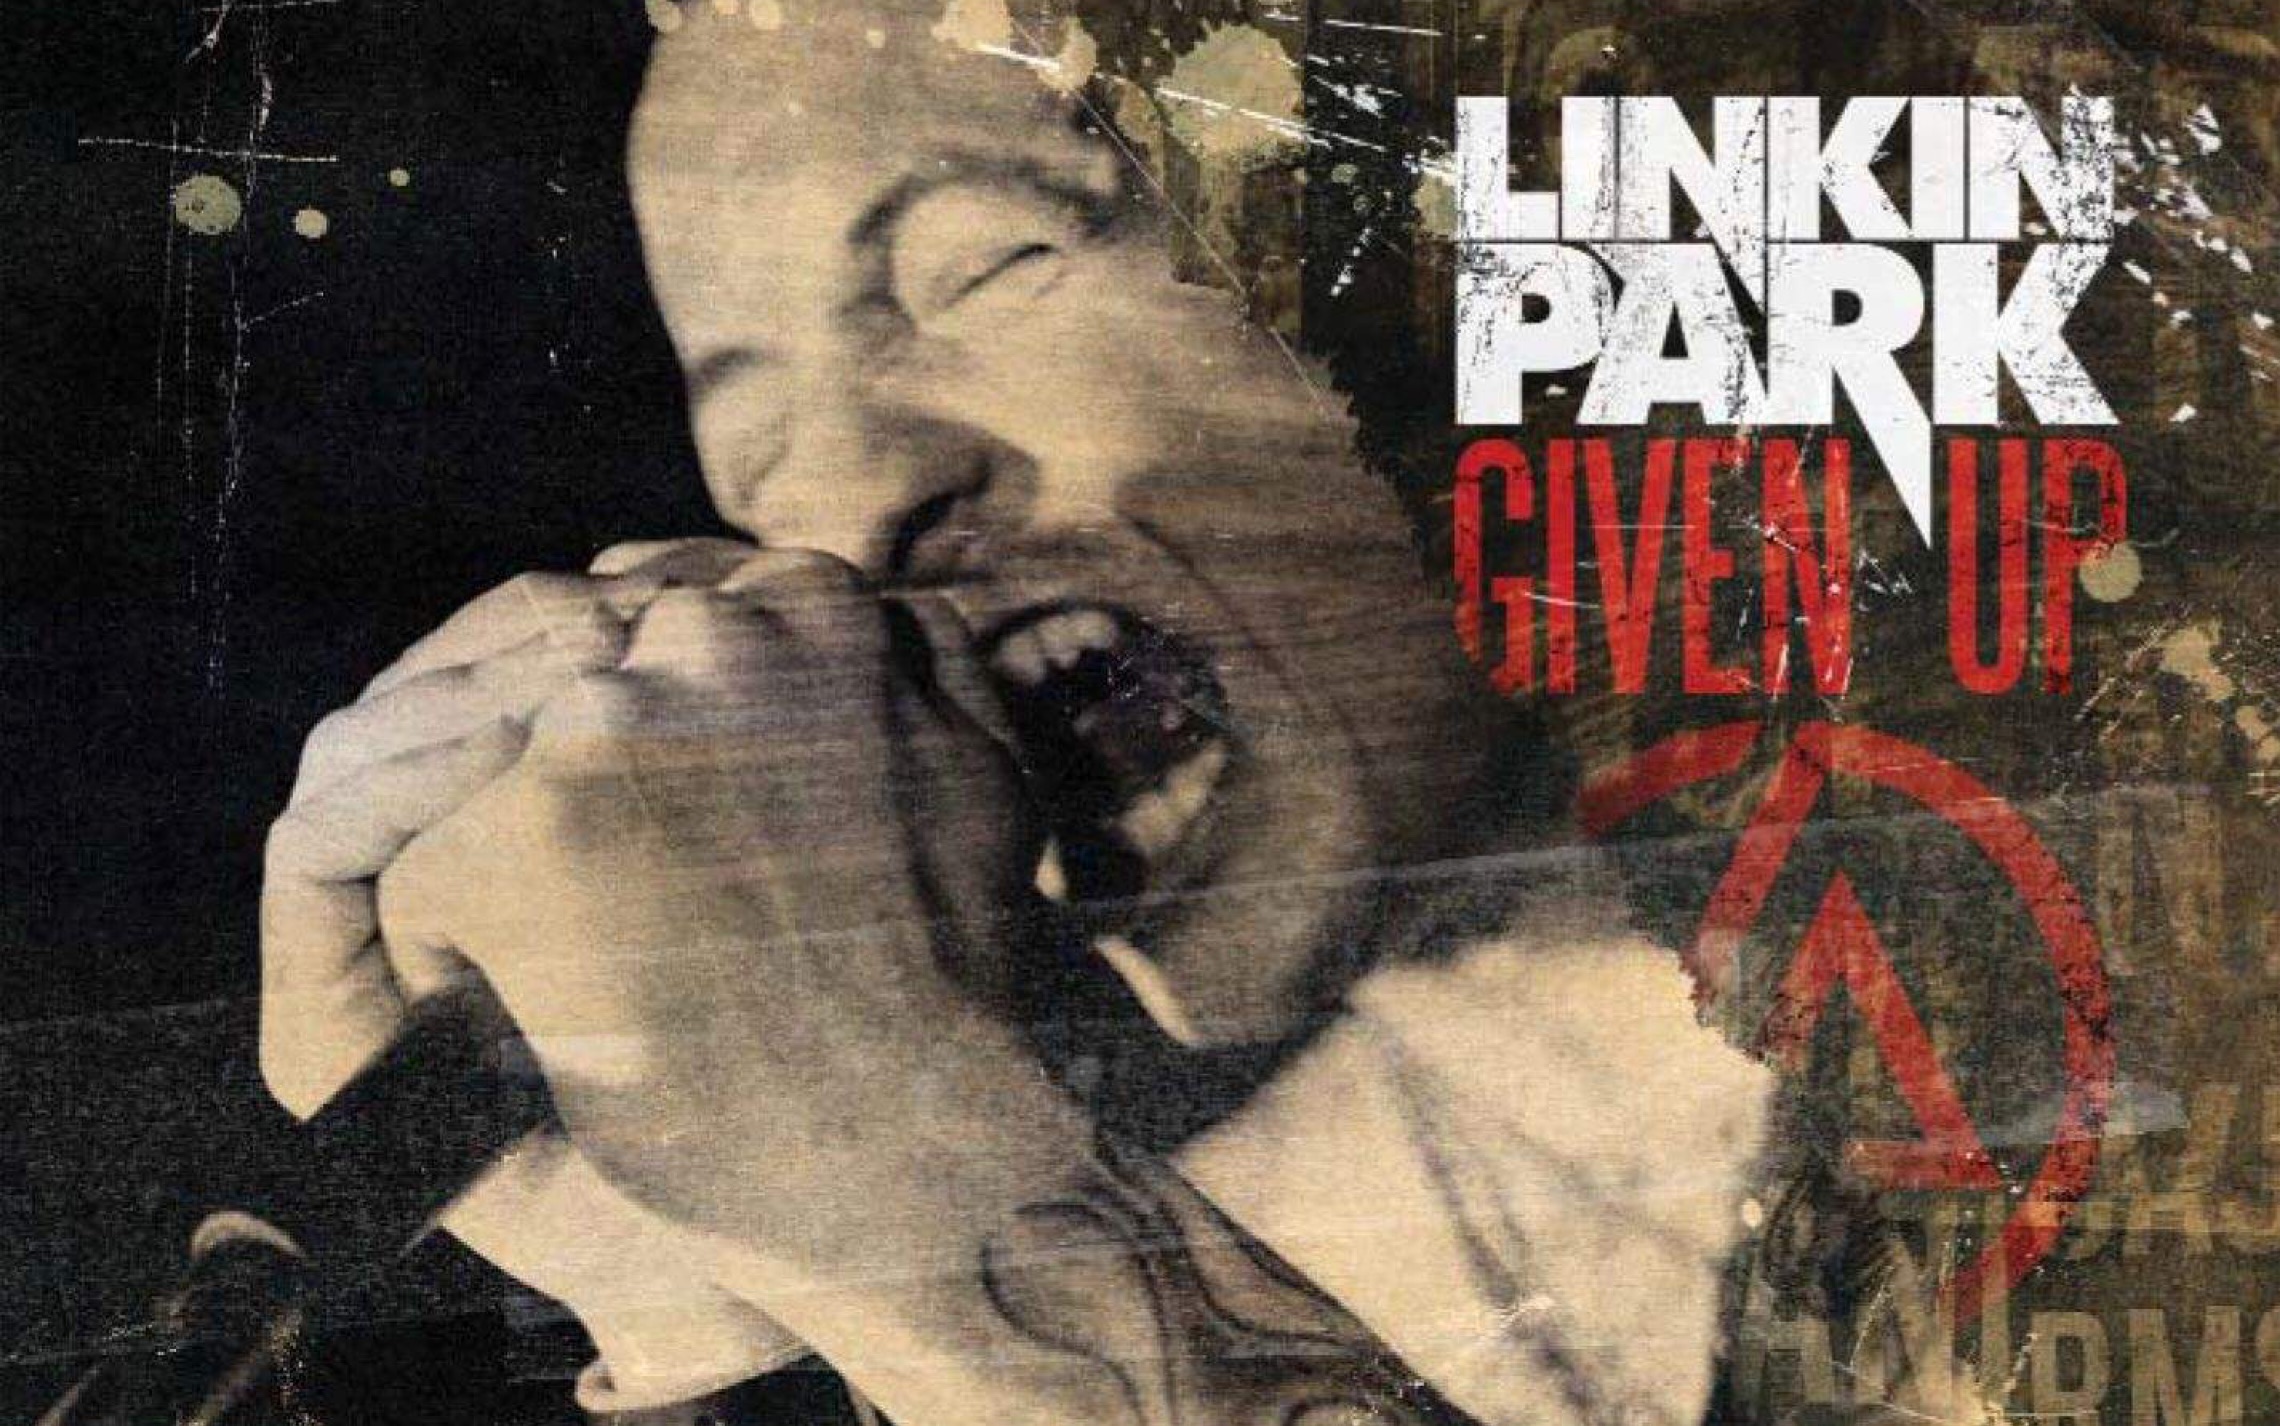 linkin park given up cover art